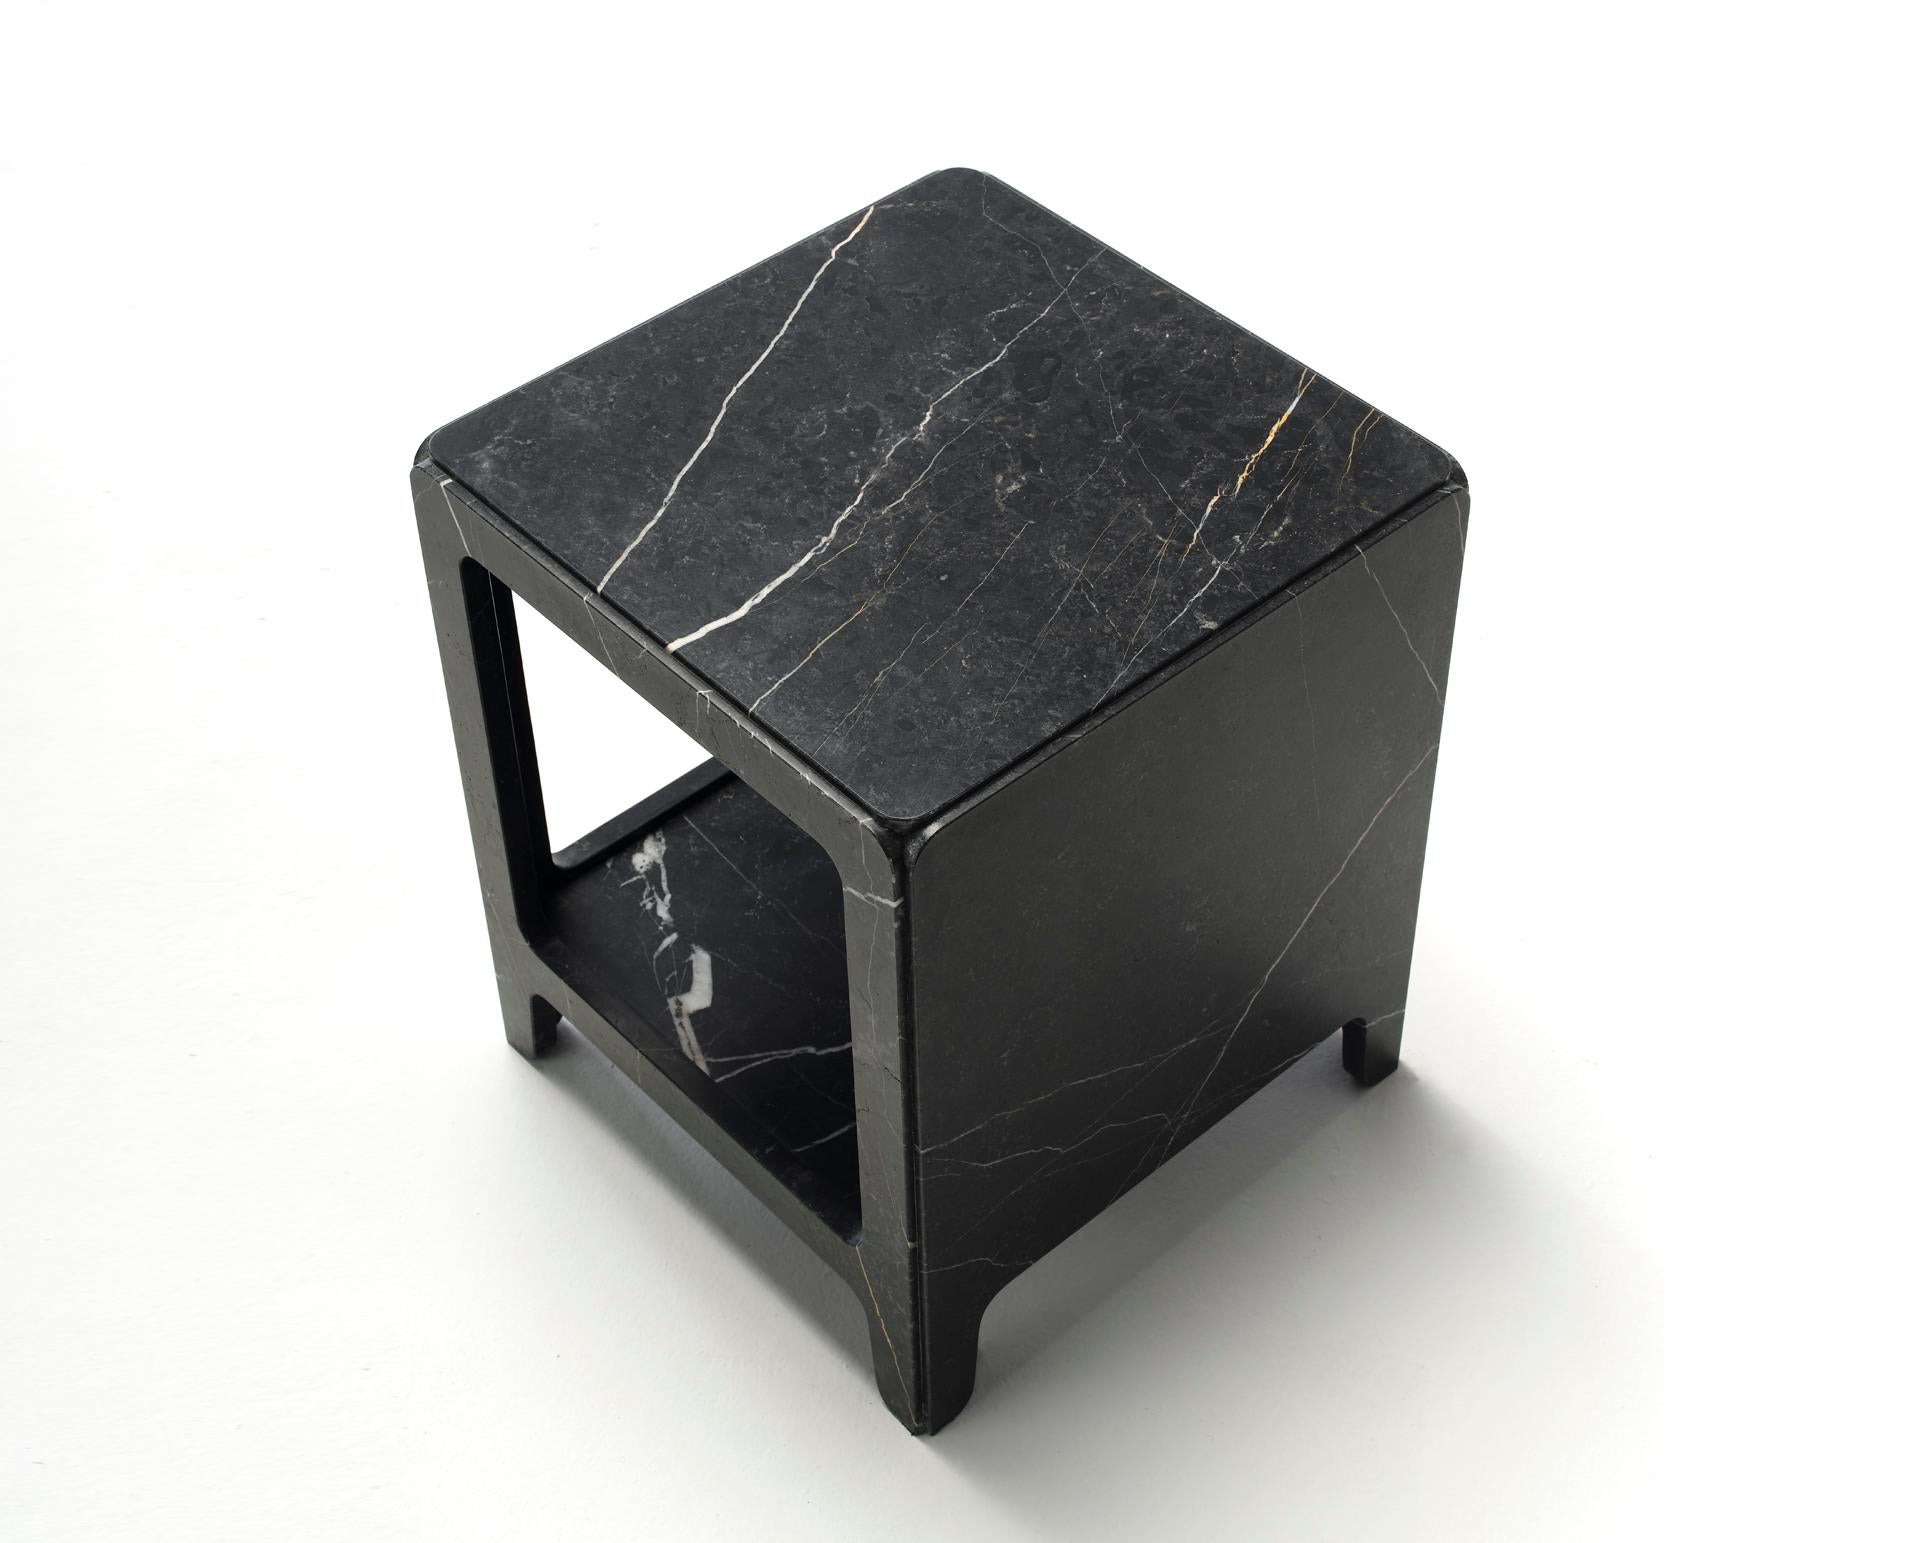 Rock, a night stand completely made of marble, was designed by Alberto Colzani and produced by Epònimo in Milano. Through a simple trick the piece, which is in fact the assembly of five parts, appears sculpted from a solid block. Rock can be